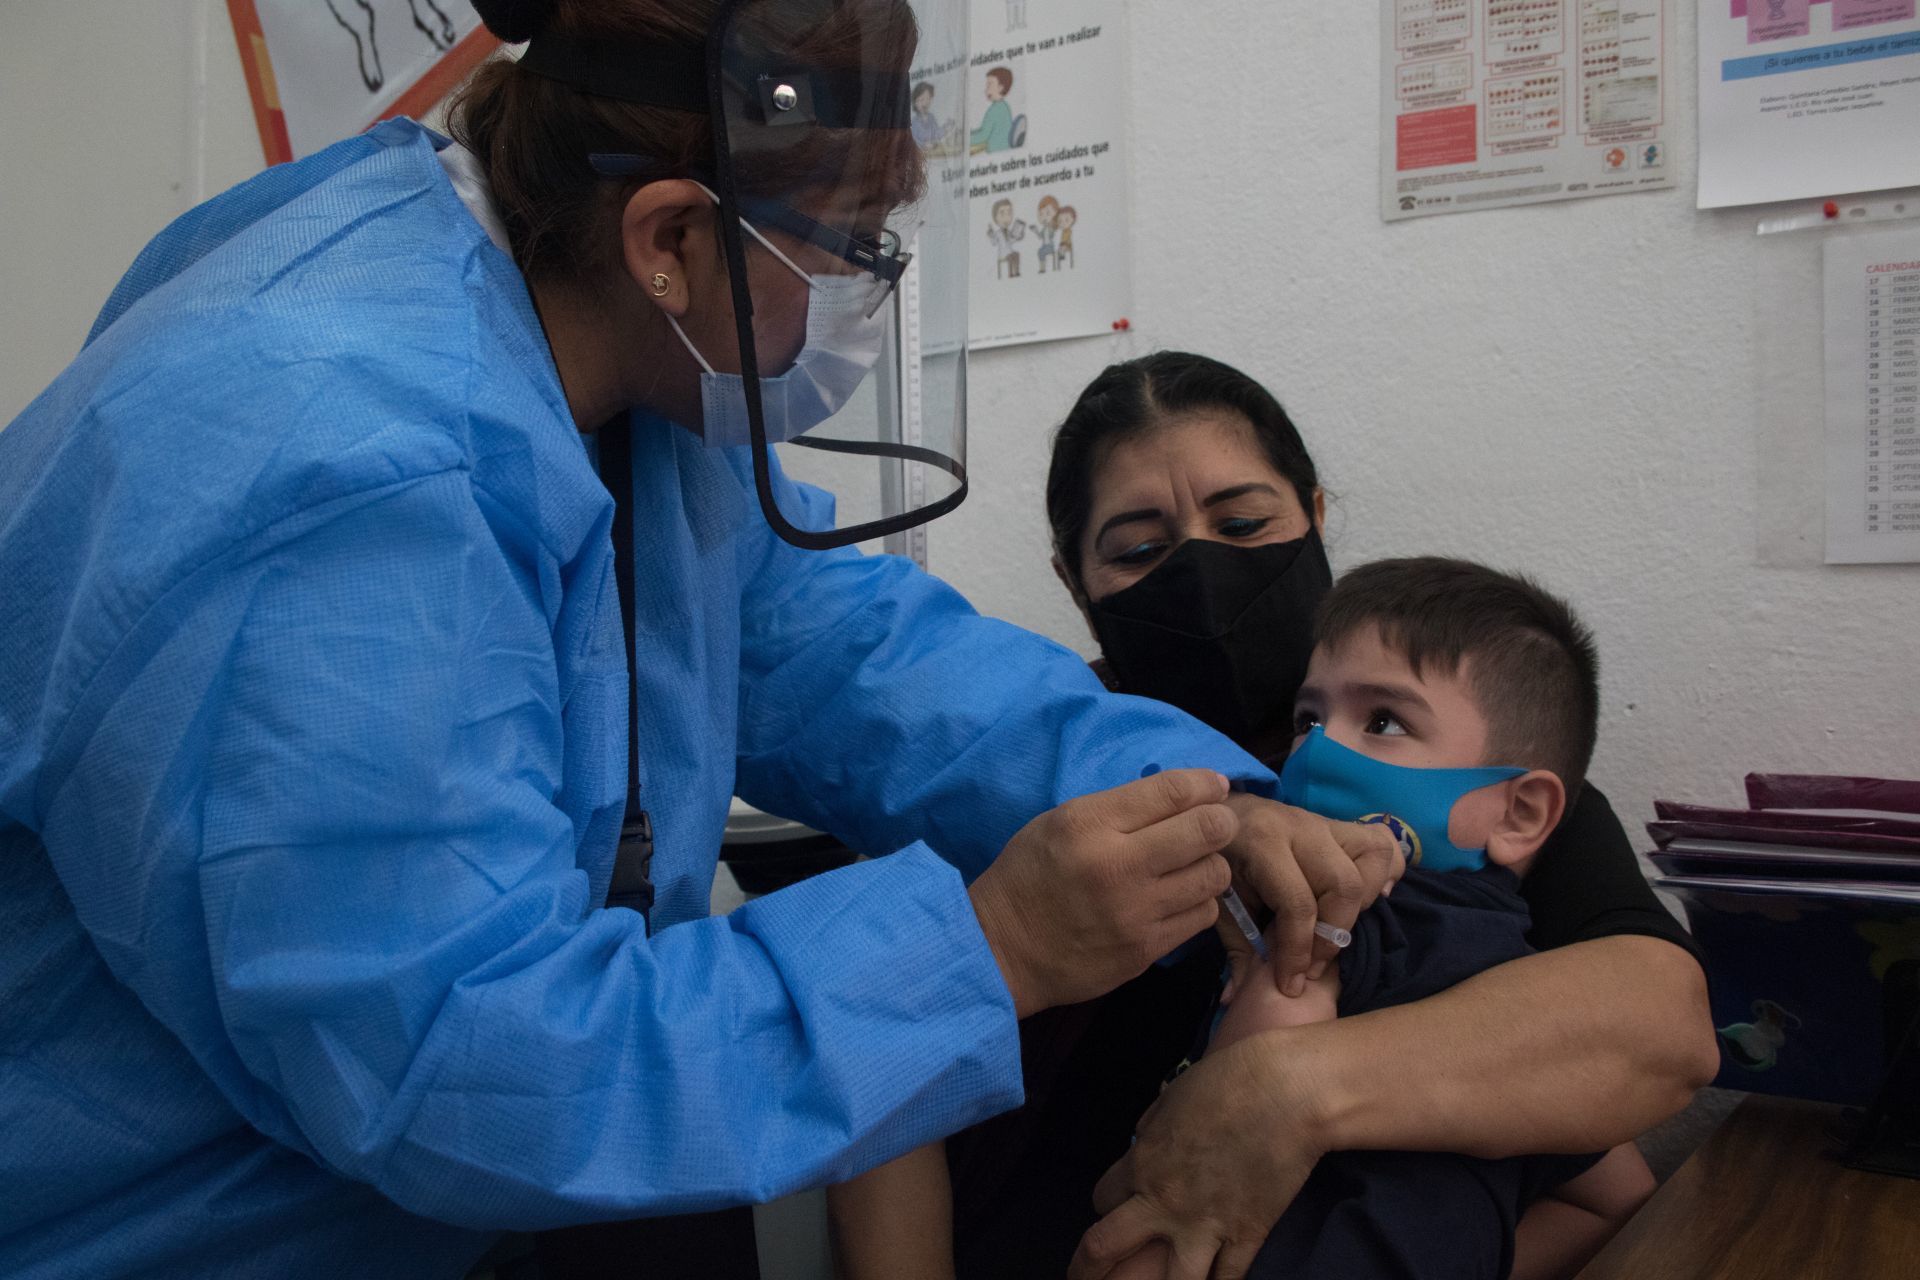 Mexico among the 10 countries that vaccinated children the least in 2020